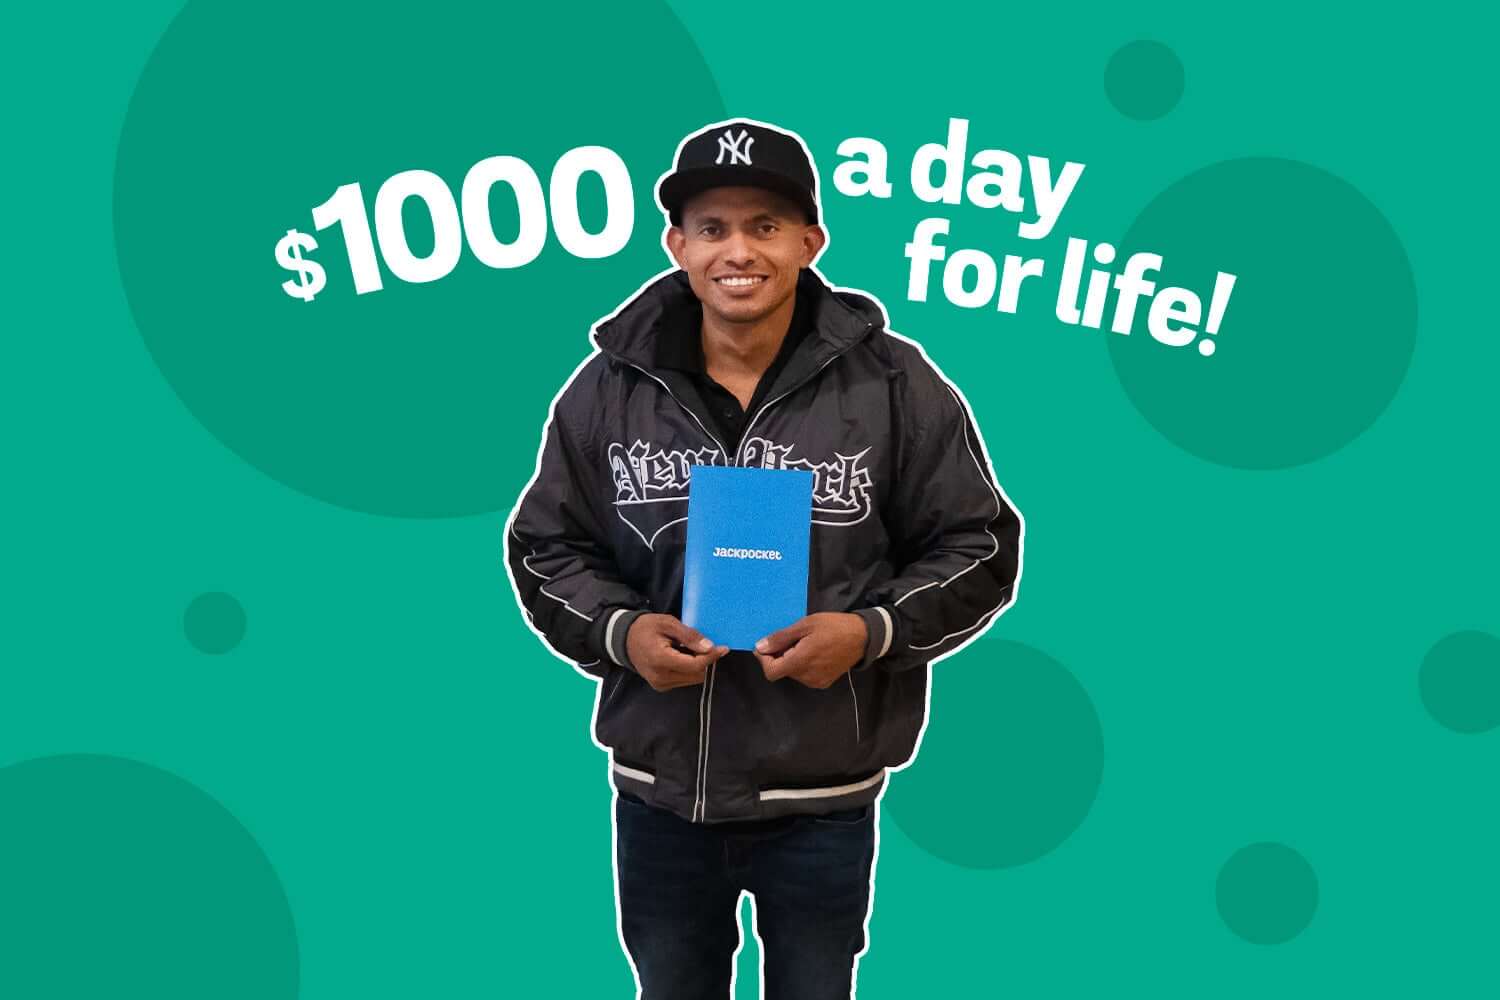 $1,000 a day for life winner